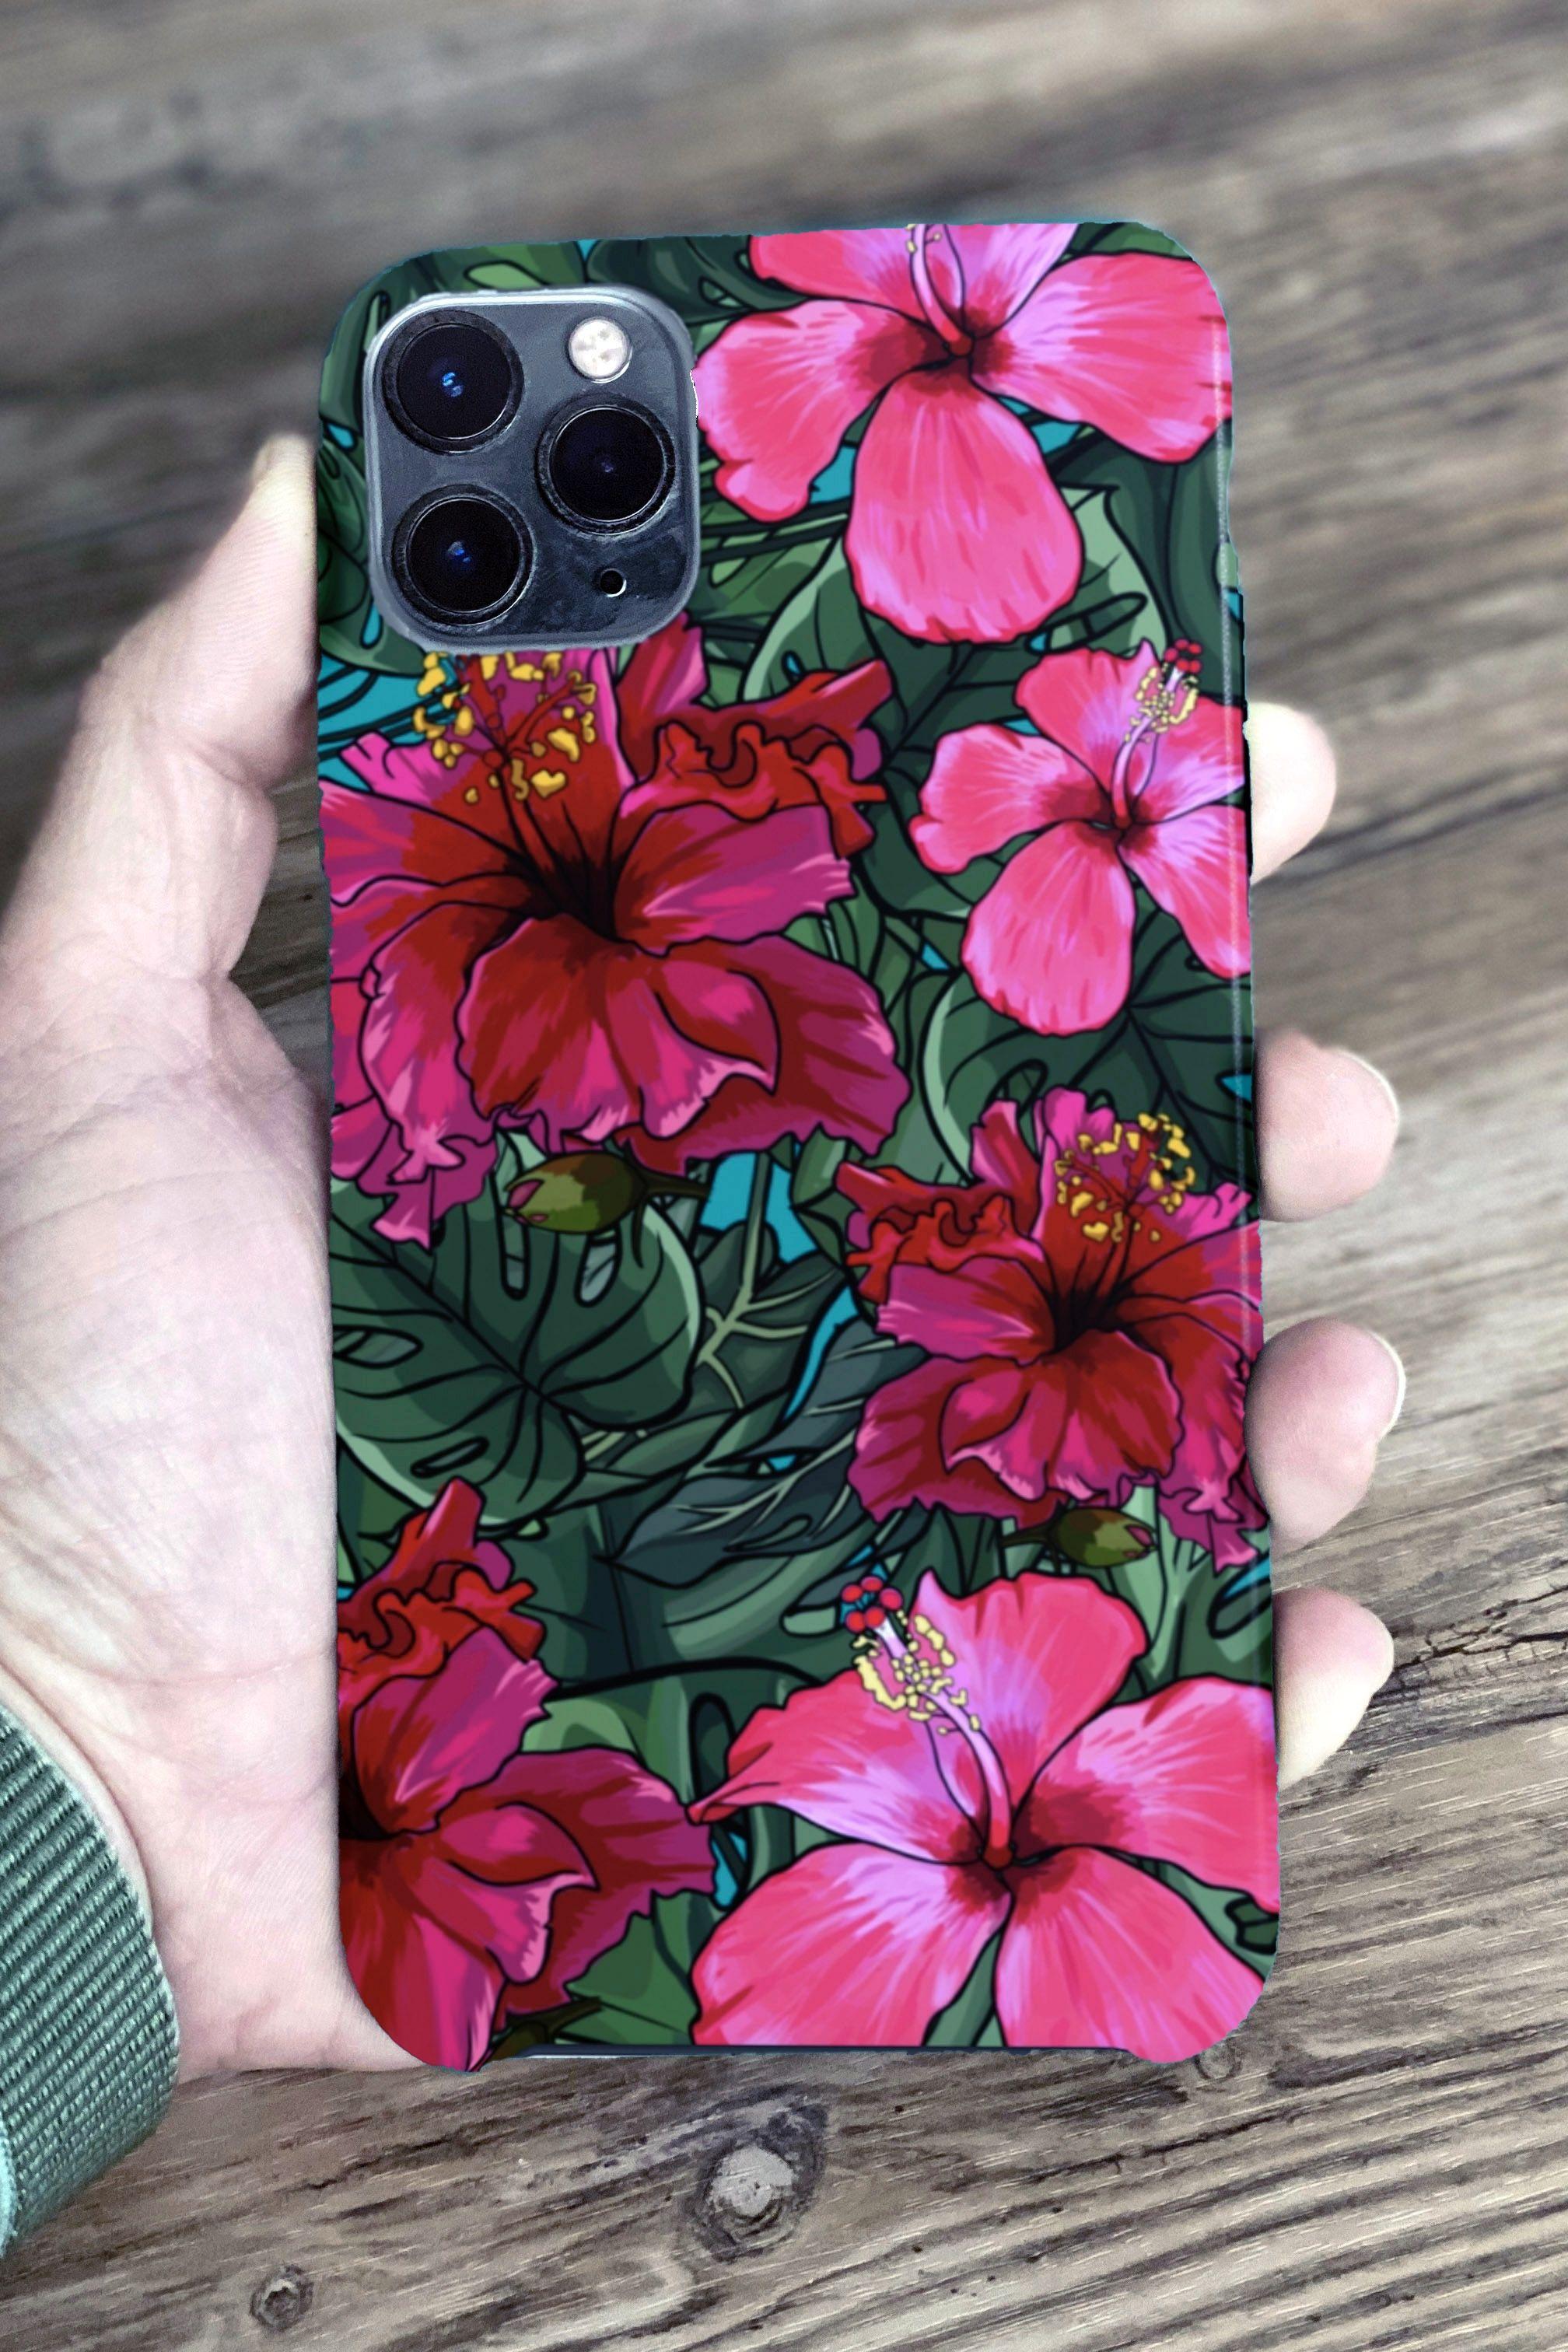 2016 x 3024 · jpeg - IPhone Floral Case Pink Botanical Flower Spring and Summer | Etsy in ...